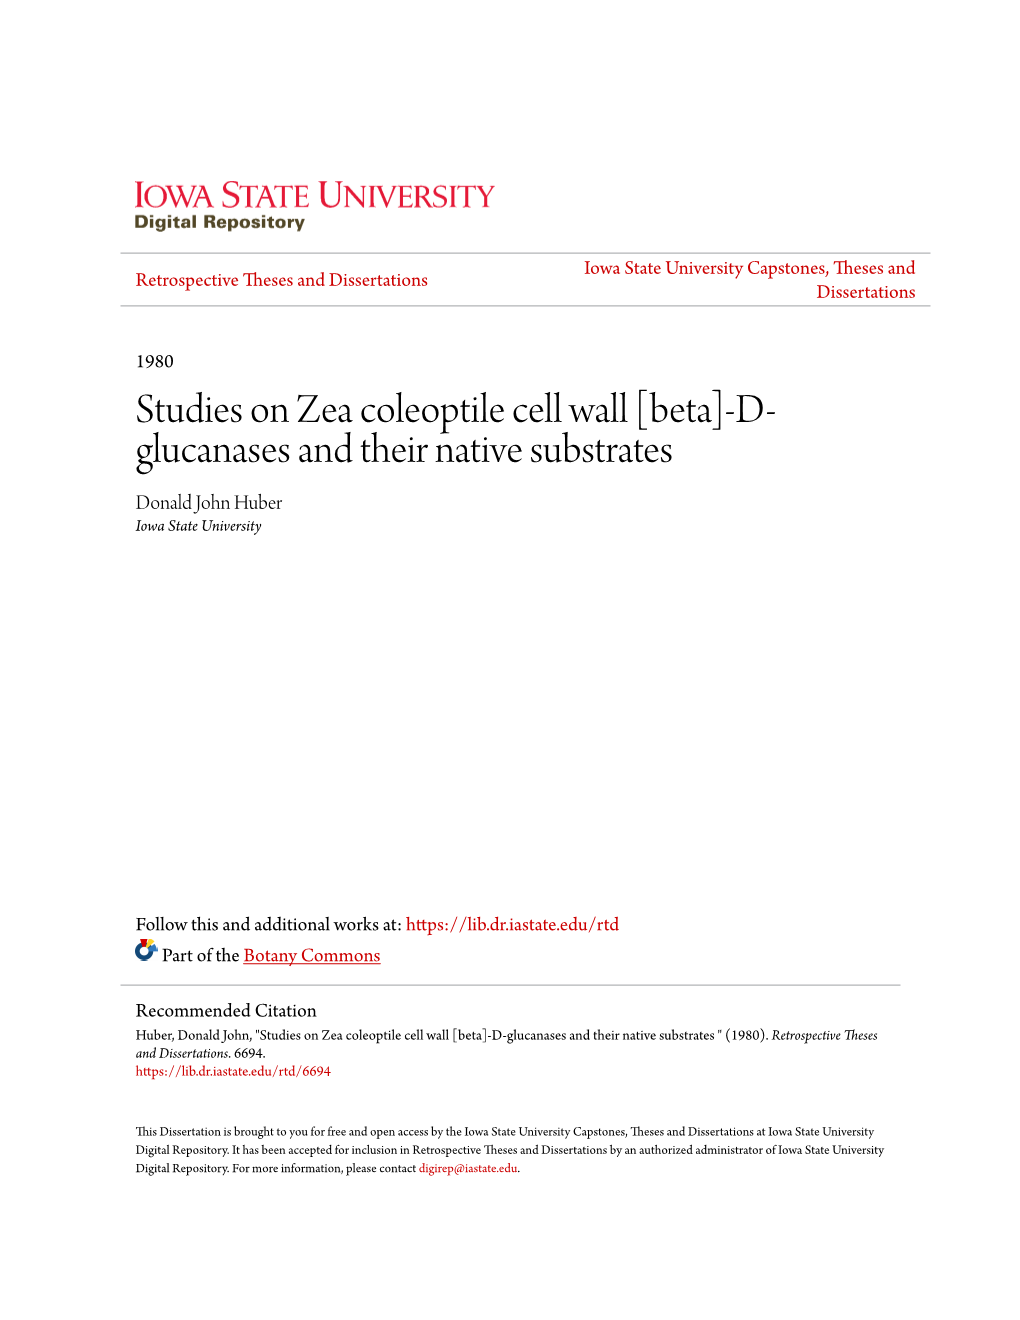 Studies on Zea Coleoptile Cell Wall [Beta]-D-Glucanases and Their Native Substrates " (1980)